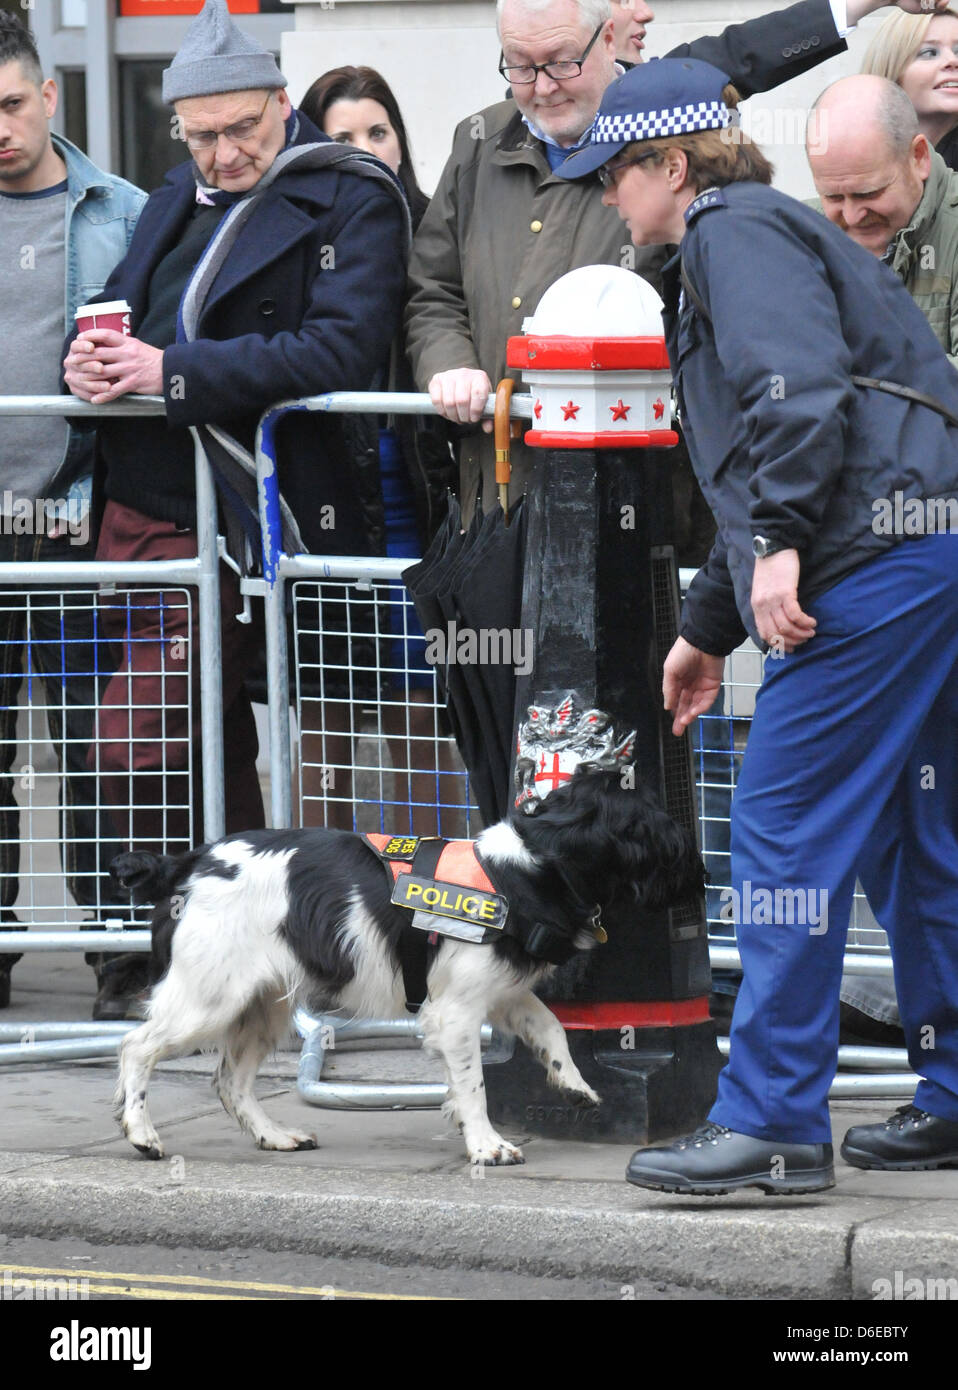 Ludgate Hill, London, UK. 17th April 2013. Sniffer dogs working as part of the high security operation. The funeral procession of Baroness thatcher takes place along the streets of central London. Credit: Matthew Chattle/Alamy Live News Stock Photo